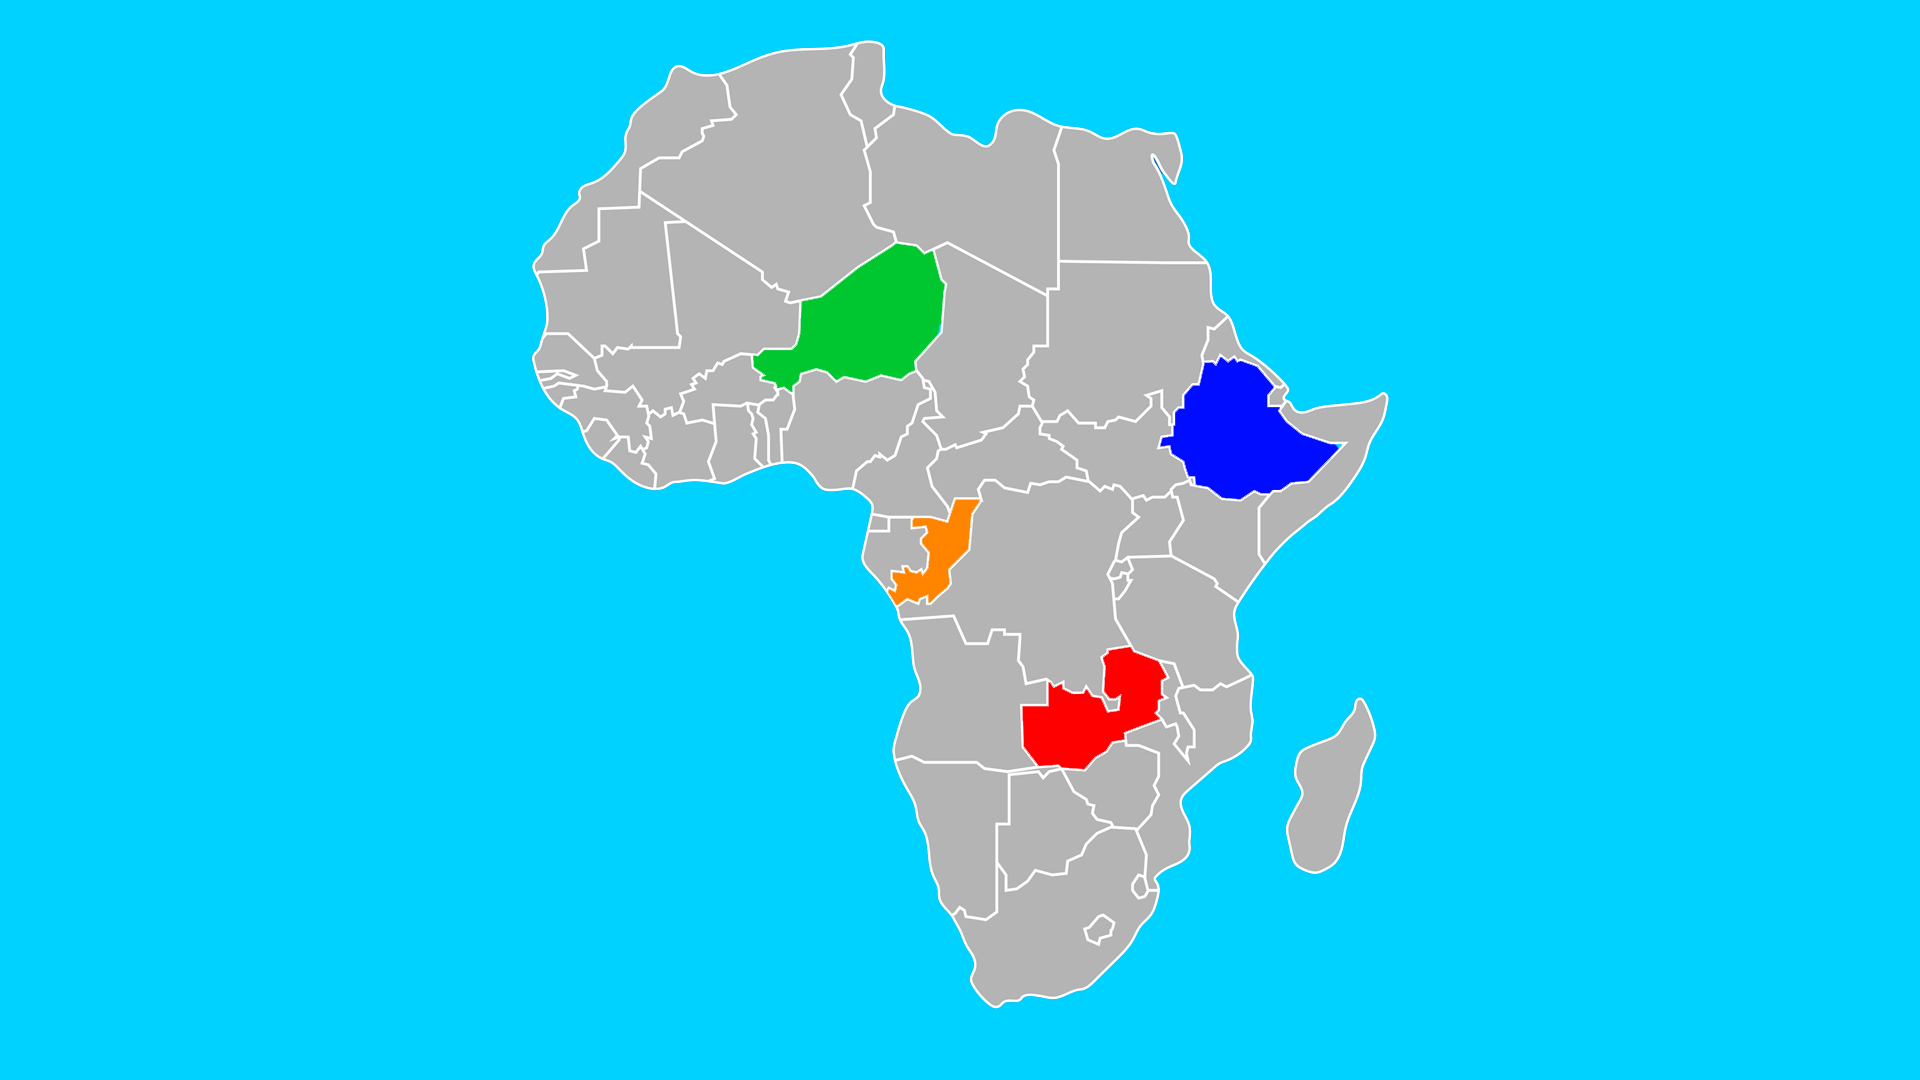 A map of Africa, but where is the Republic of Congo?